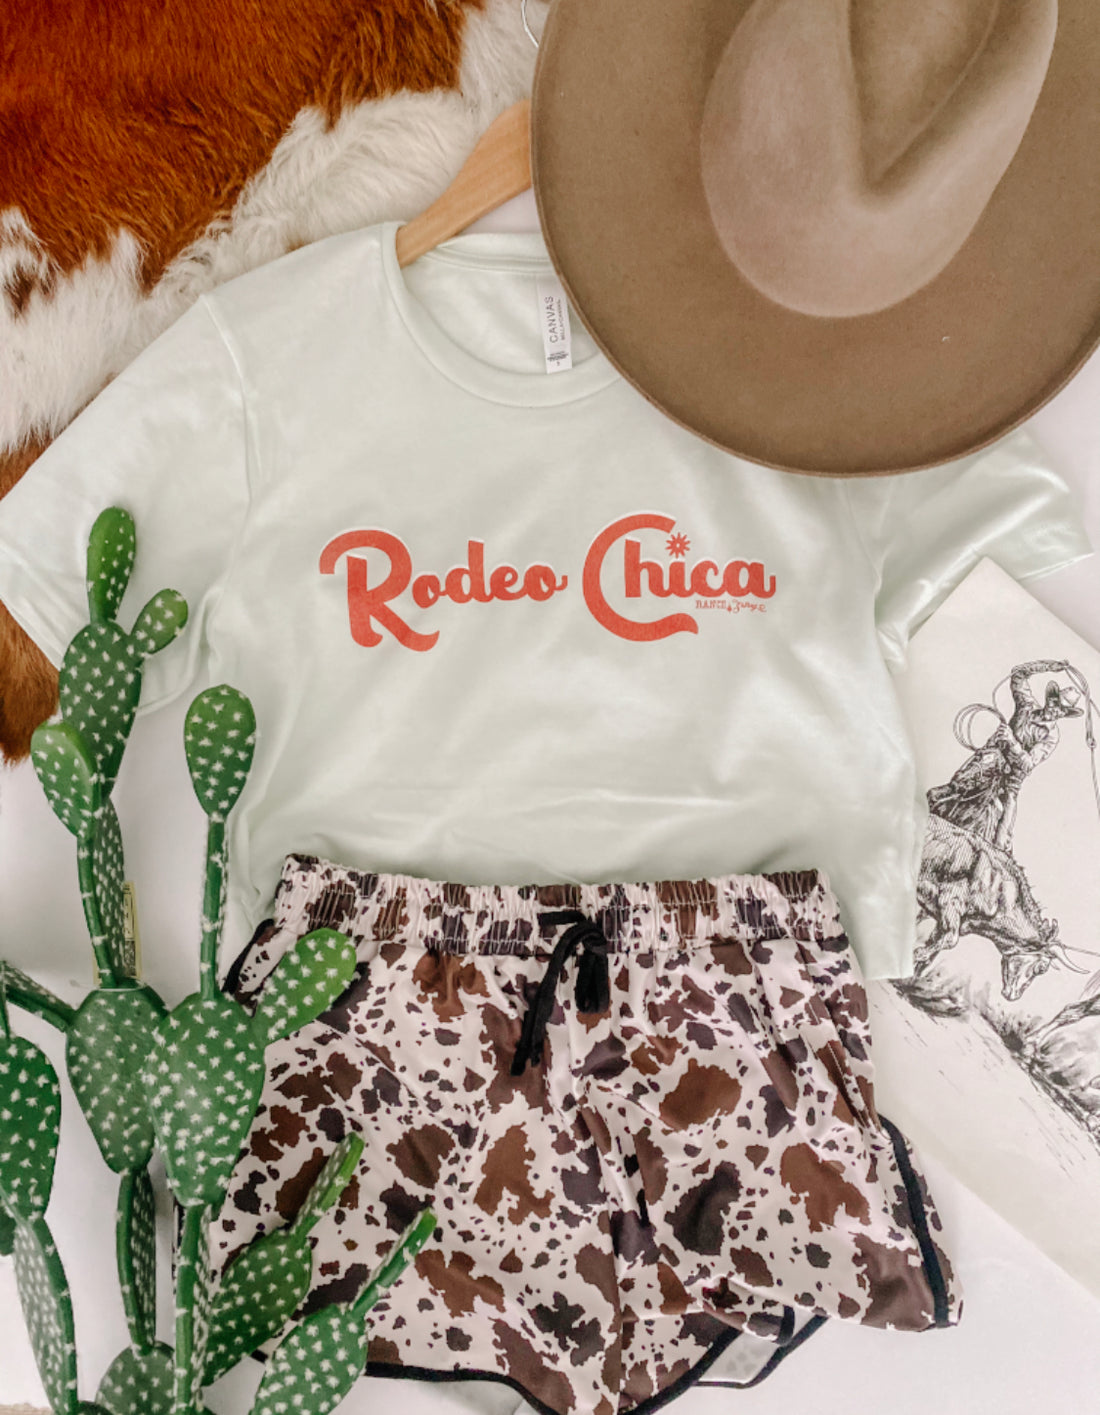 Rodeo Chica Tee (minty cream)